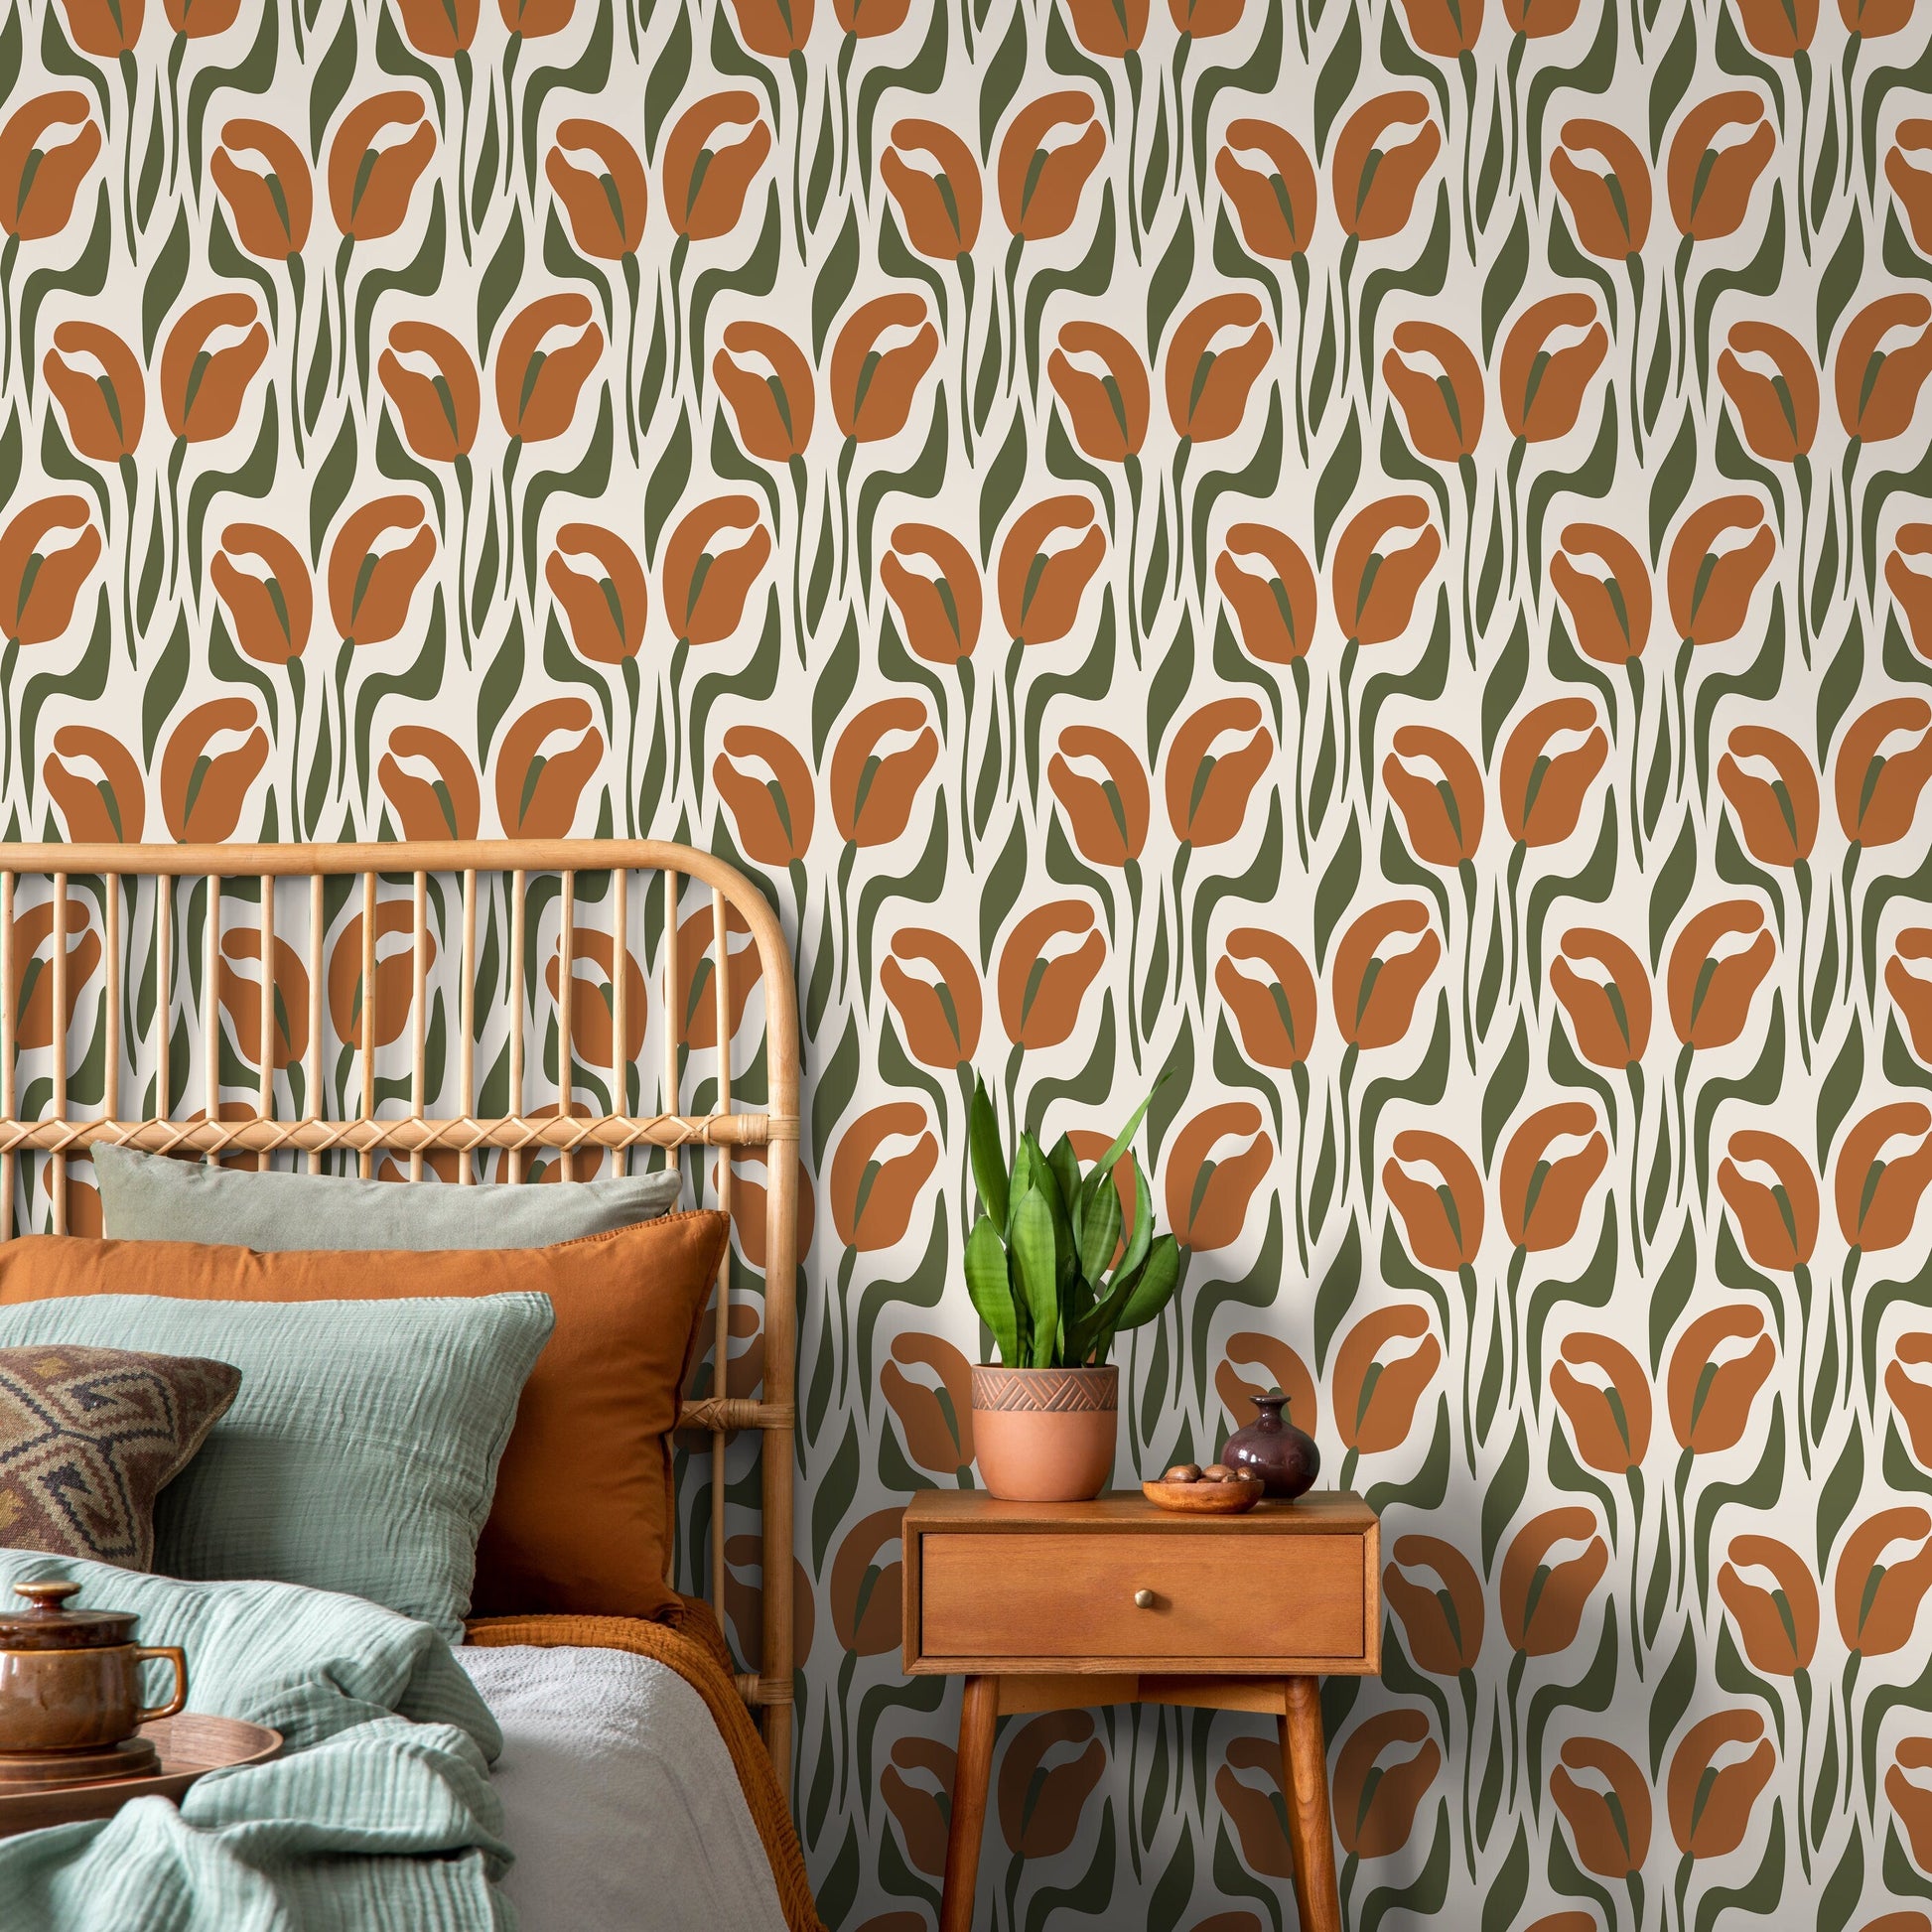 Retro Floral Wallpaper Vintage Wallpaper Peel and Stick and Traditional Wallpaper - D653